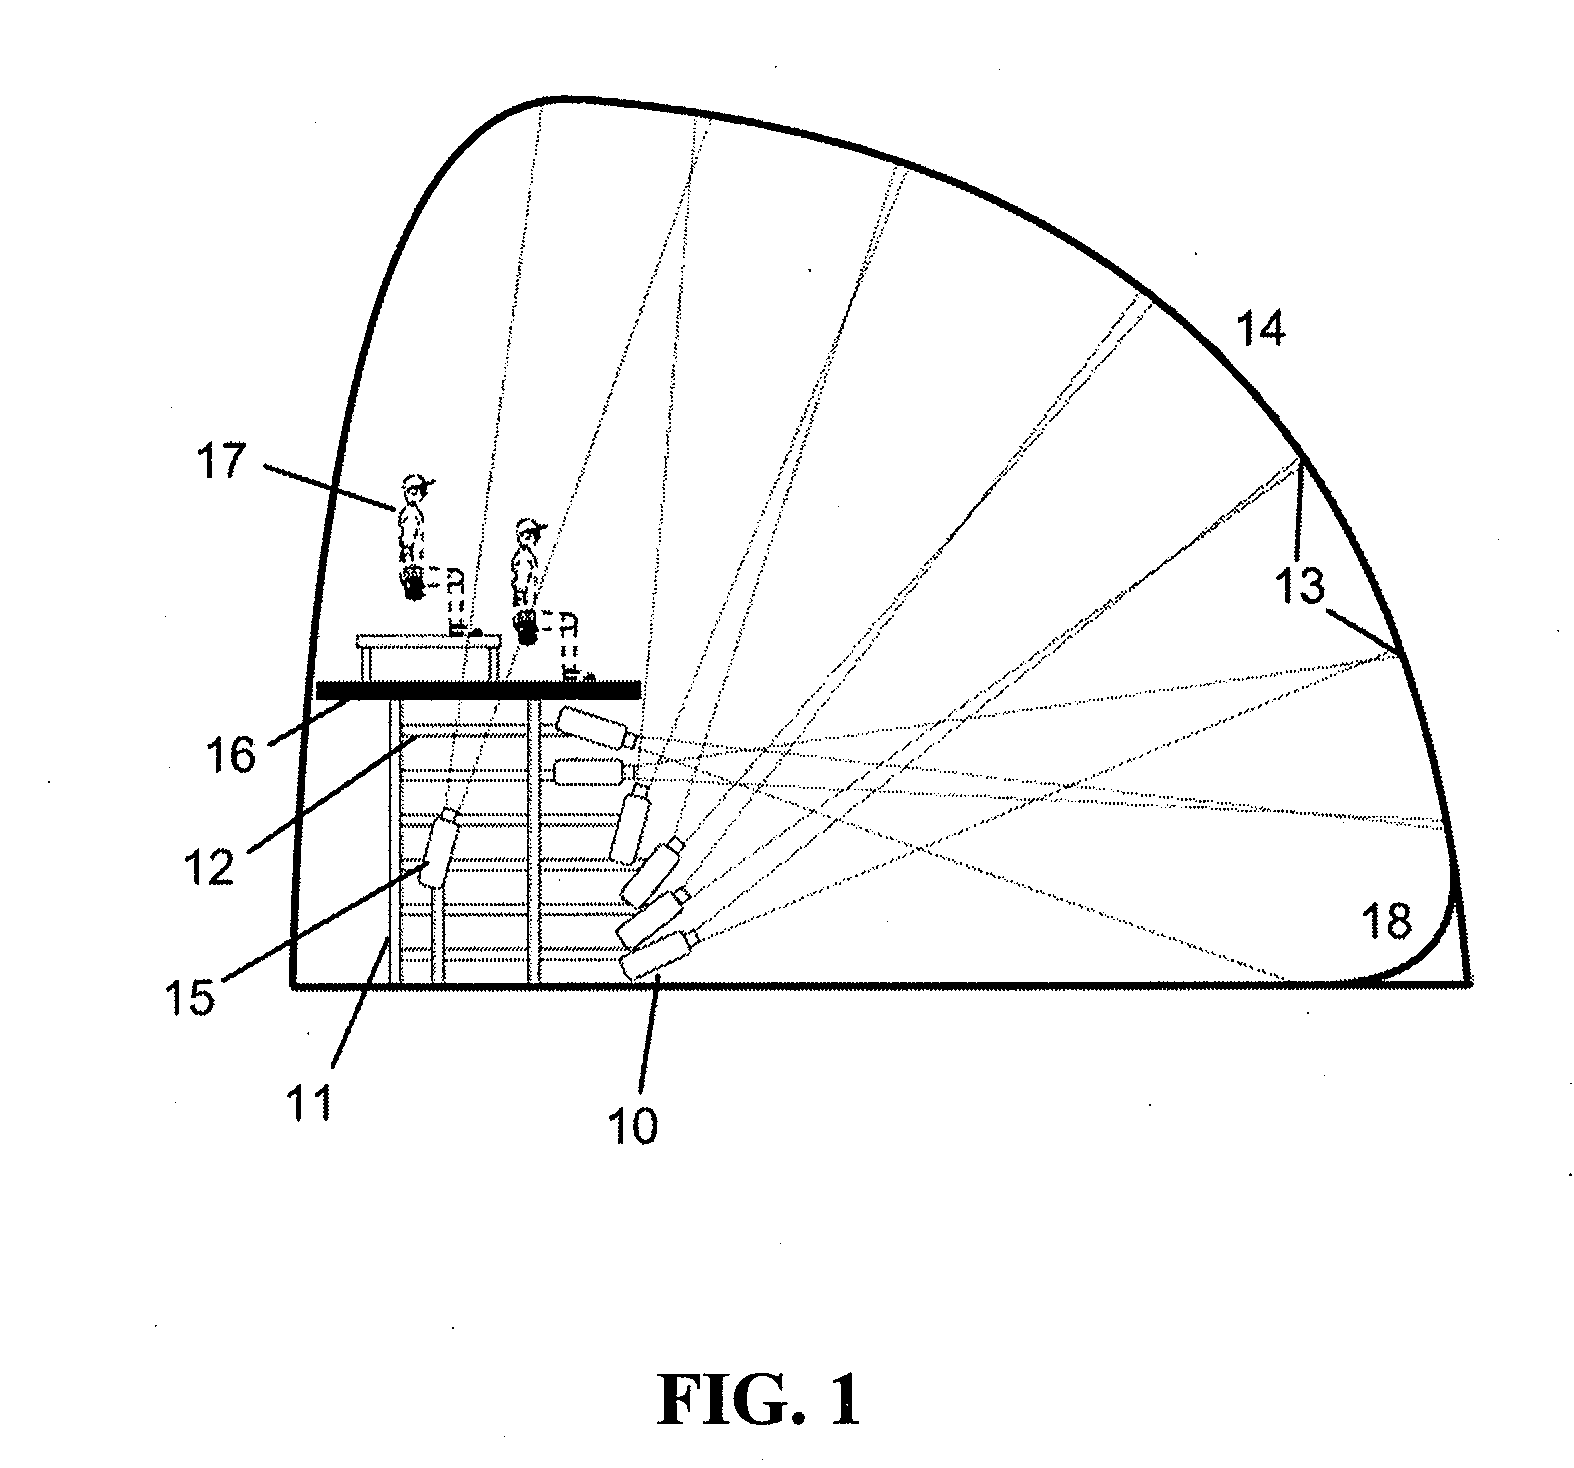 System for providing an enhanced immersive display environment